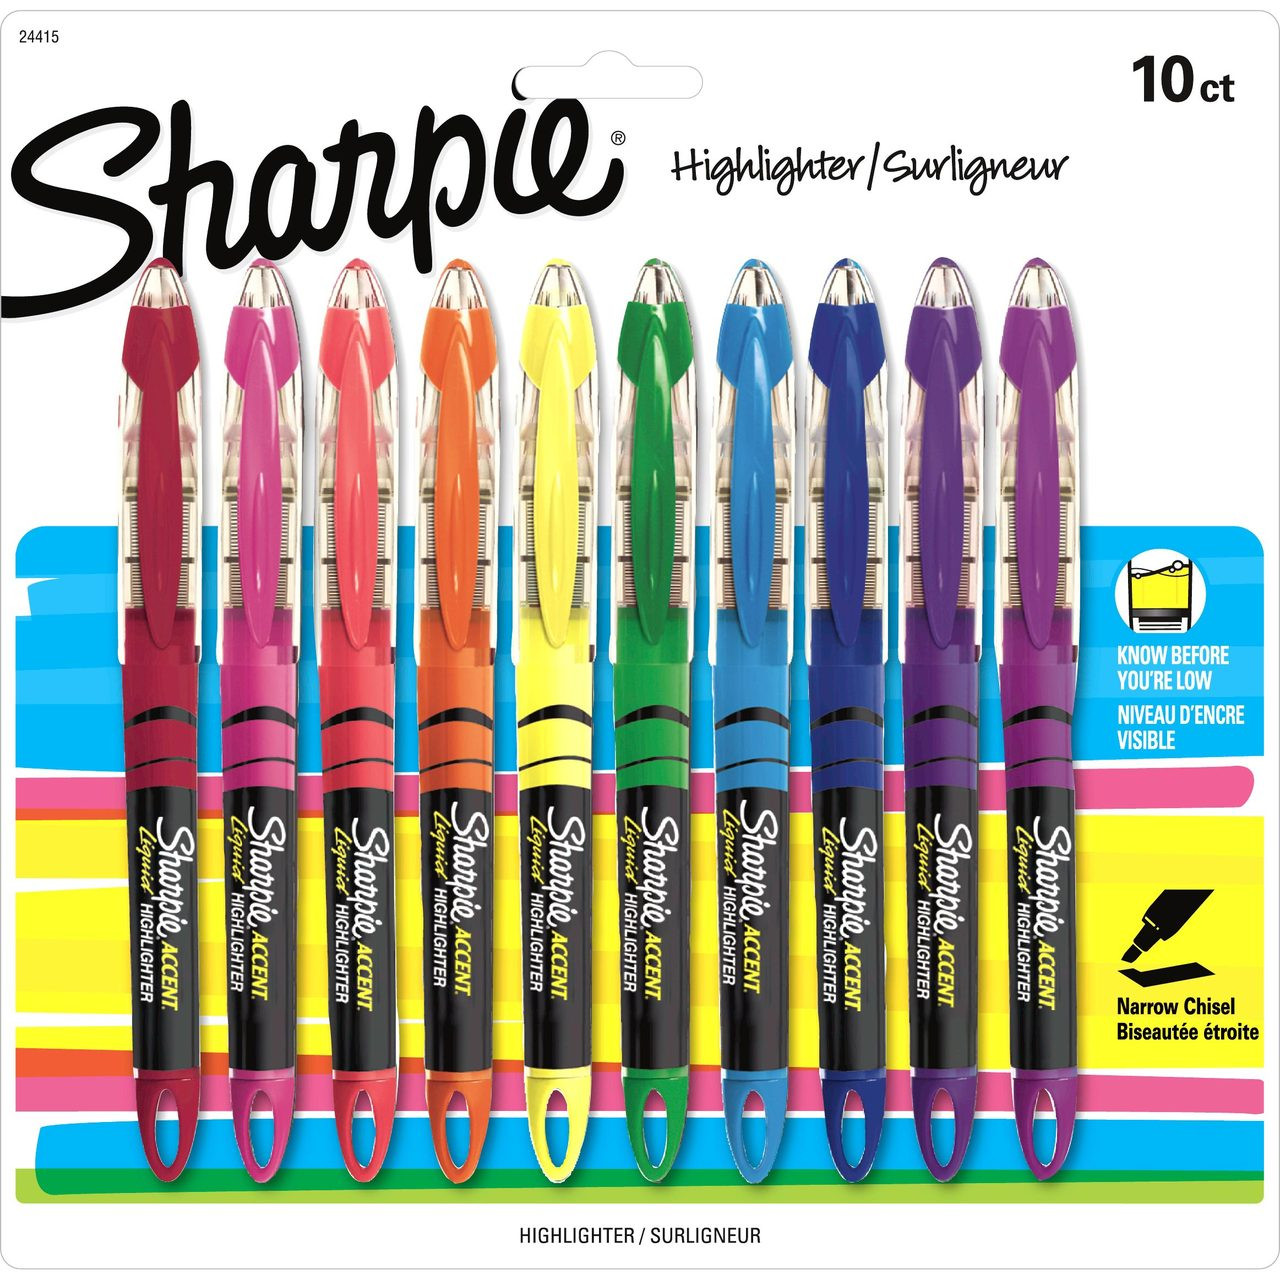 Sharpie Power Pink Ultra Fine Point Permanent Markers Pack of 6